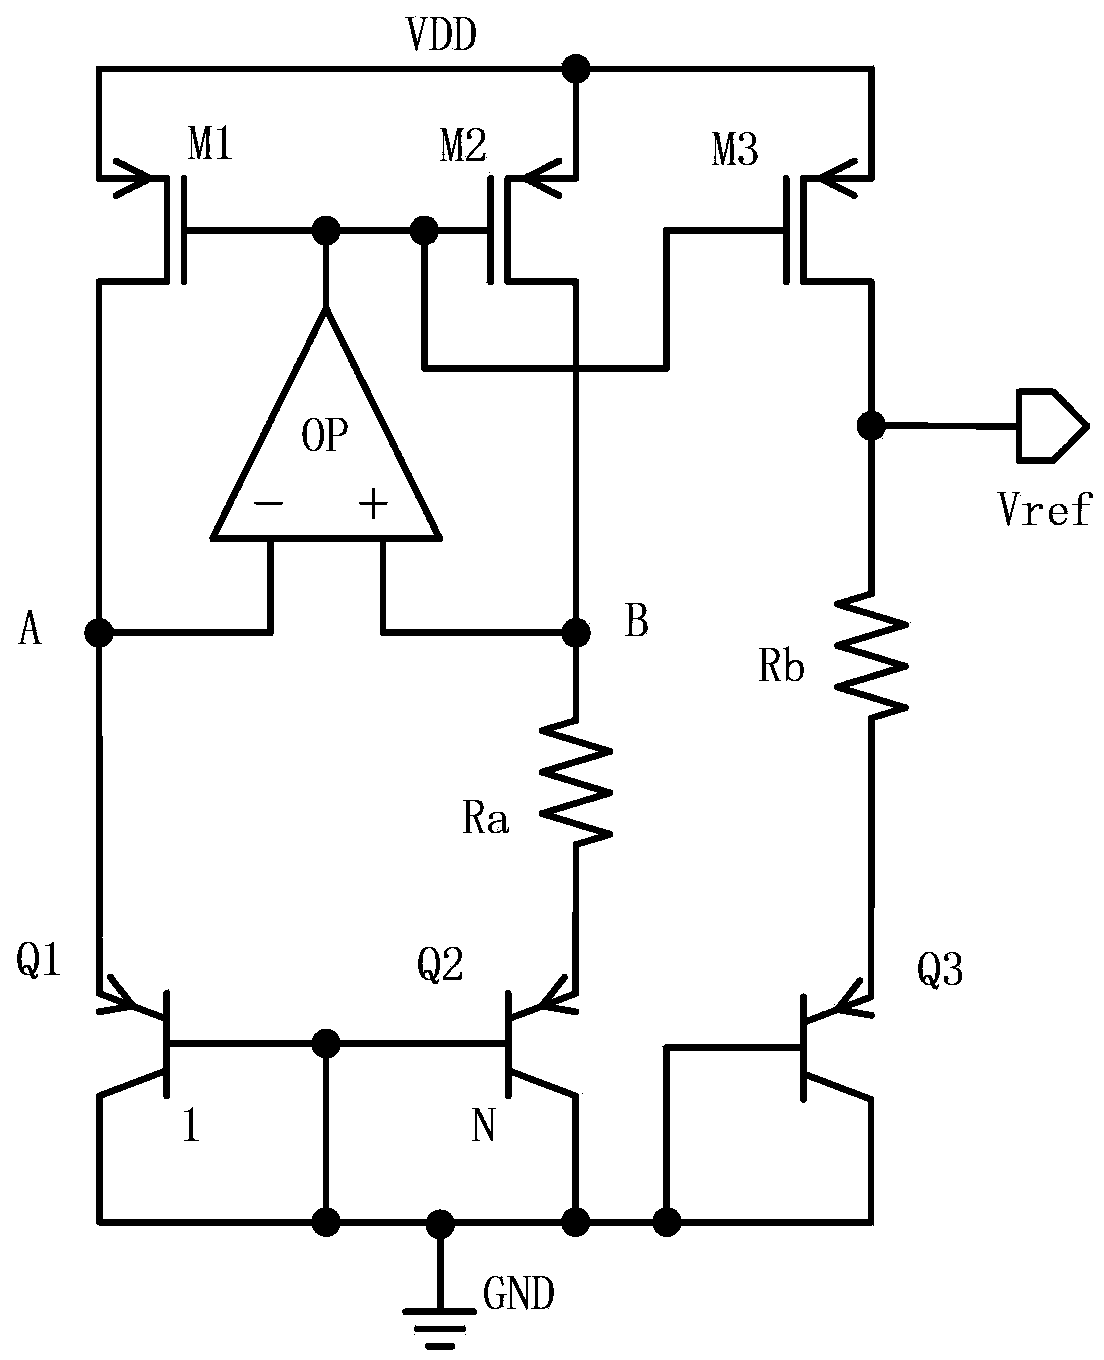 Reference voltage source